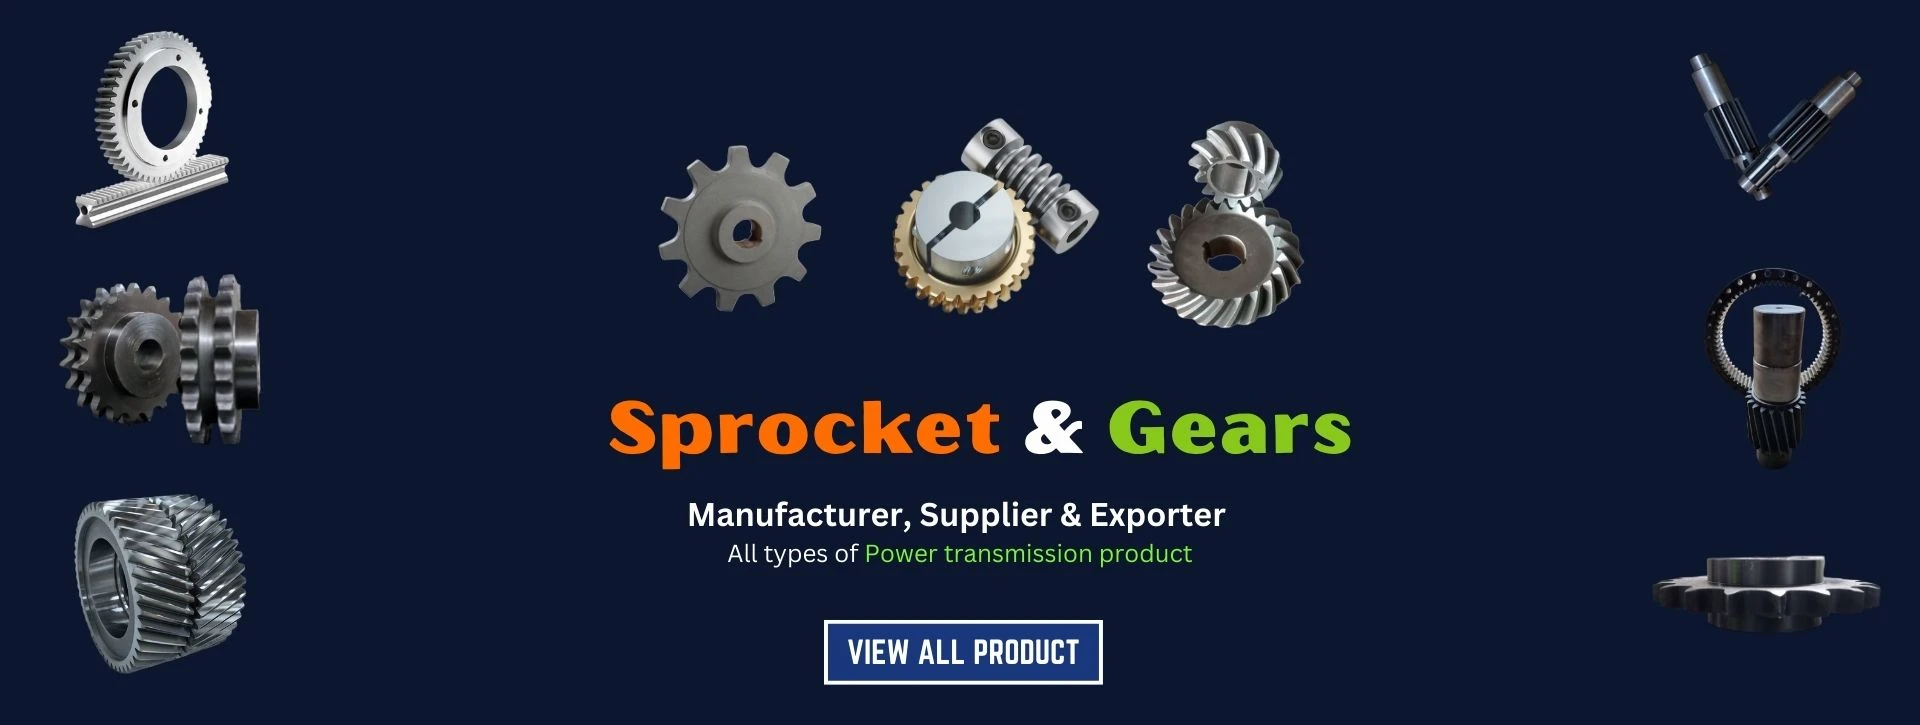 All types of industrial sprockets are shown by leading sprocket manufacturer known as anant engineering